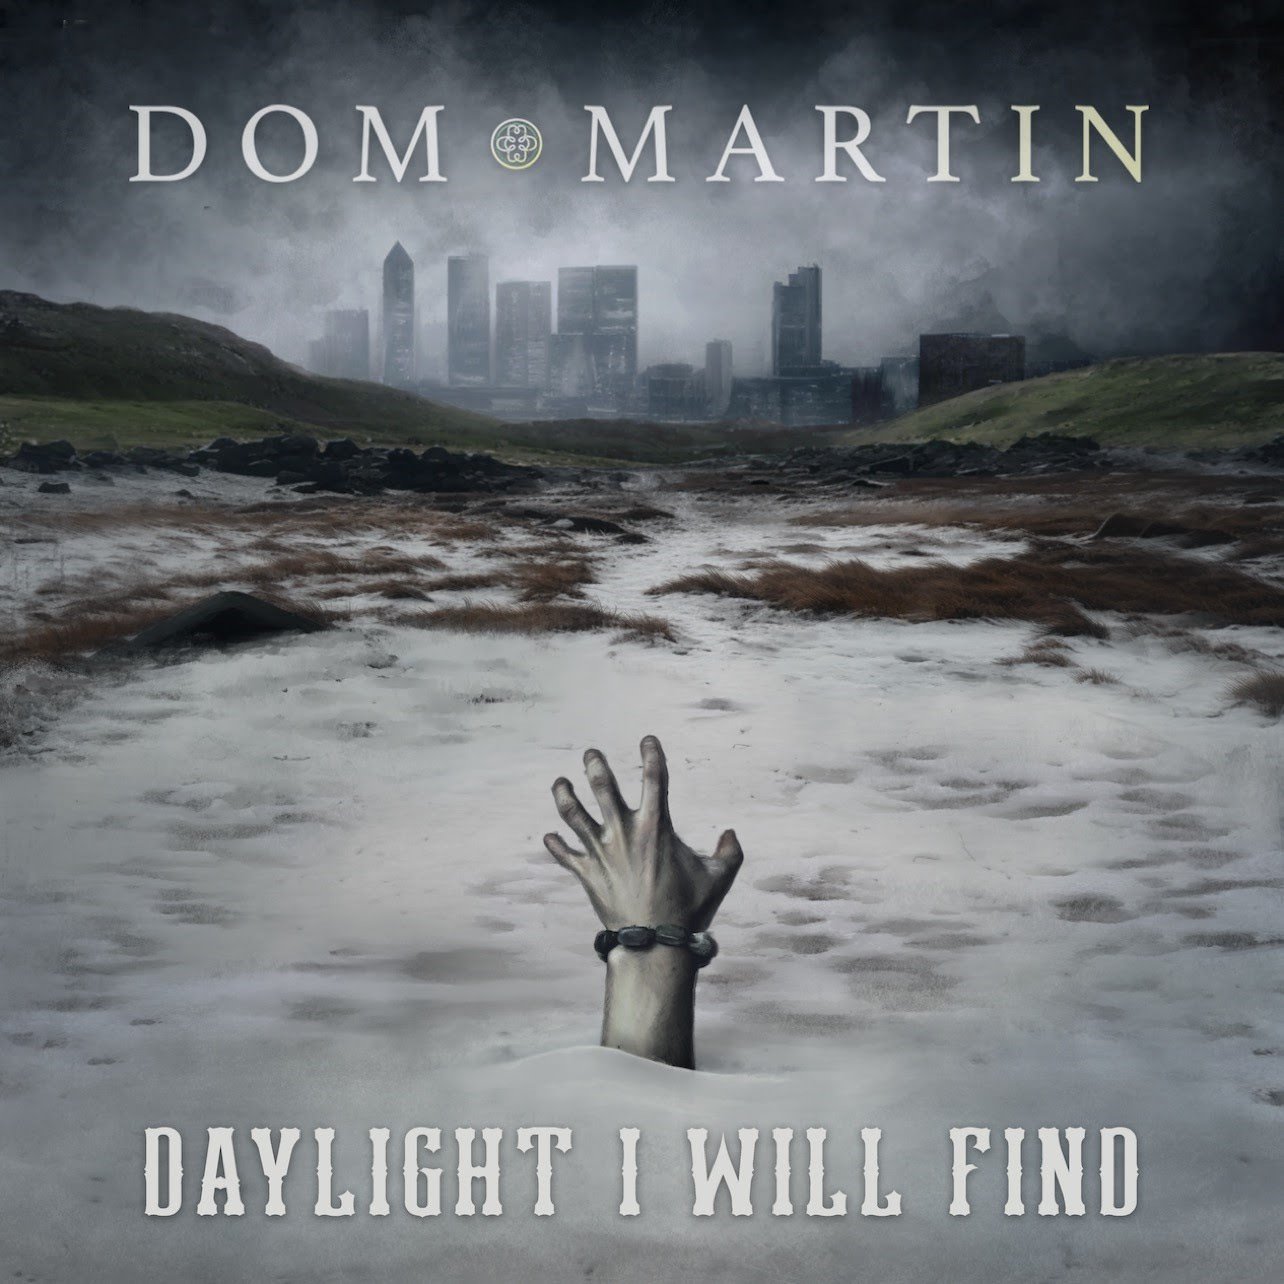 Dom Martin releases "Daylight I Will Find" single & music video from new album "Buried In The Hail"